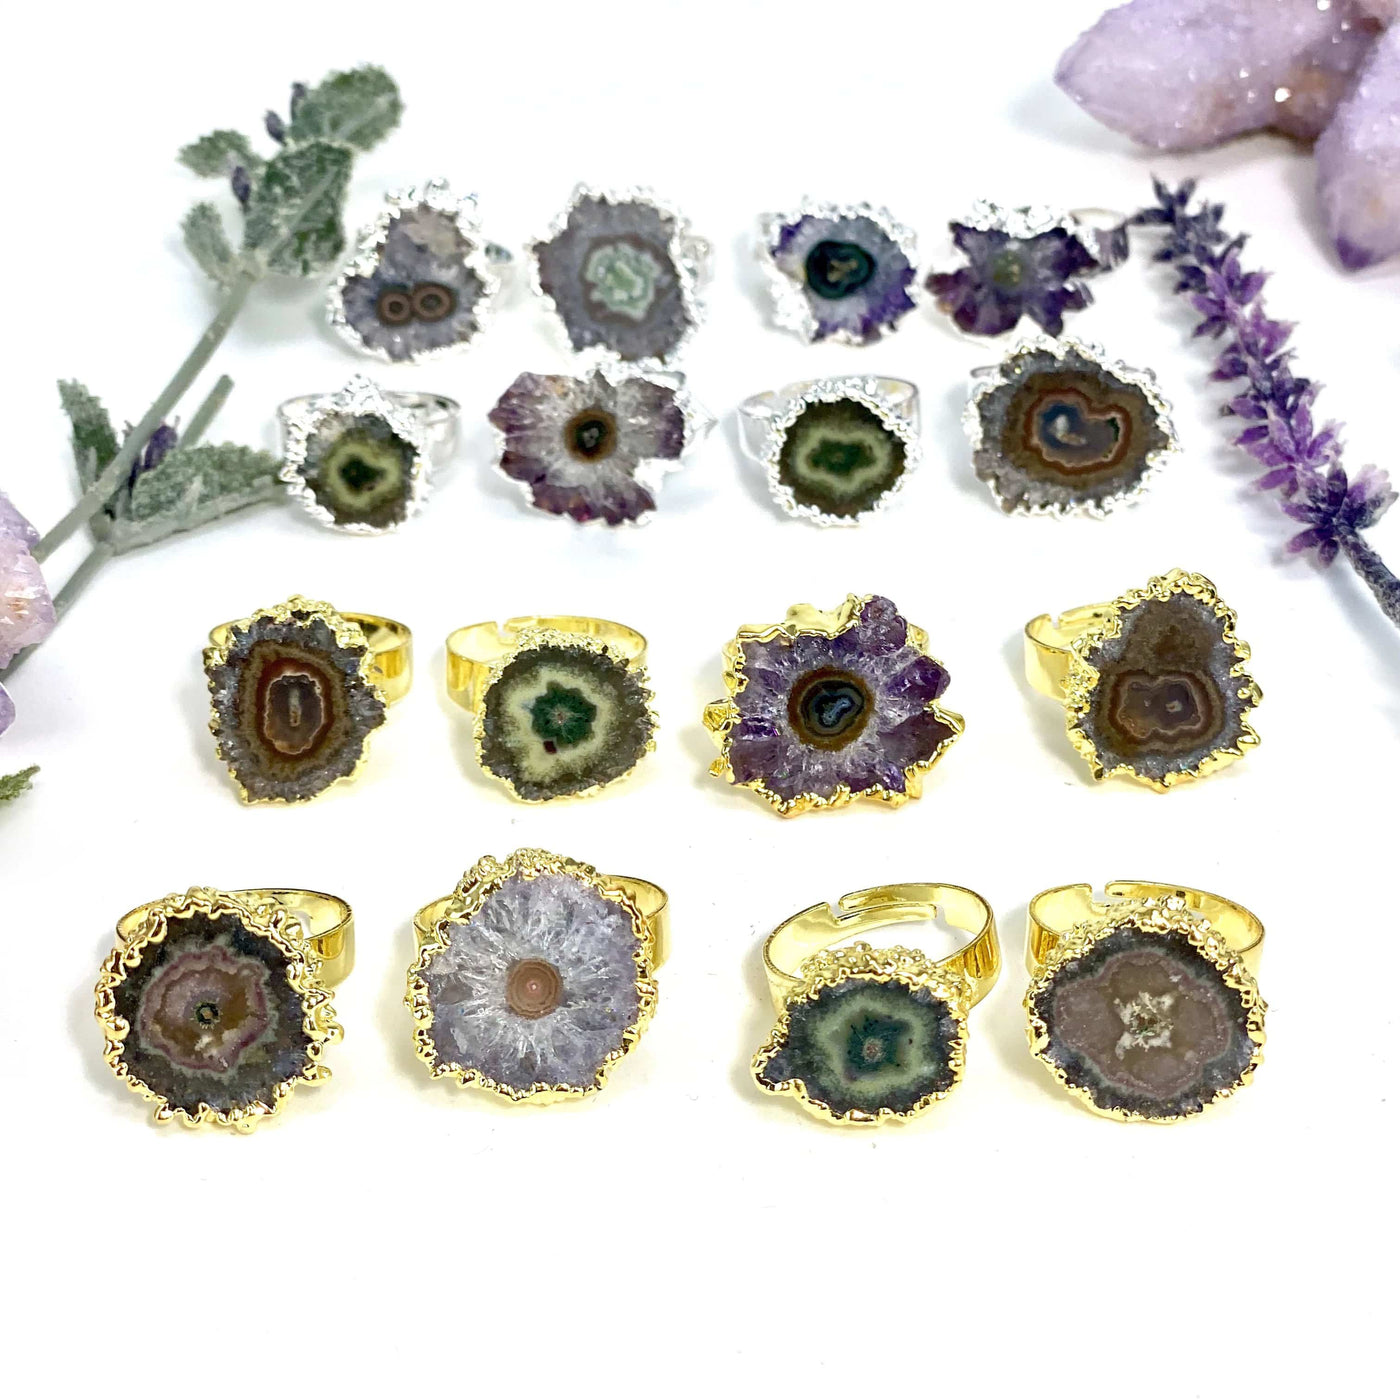 8 silver amethyst stalactite rings and 8 gold amethyst stalactite rings with decorations